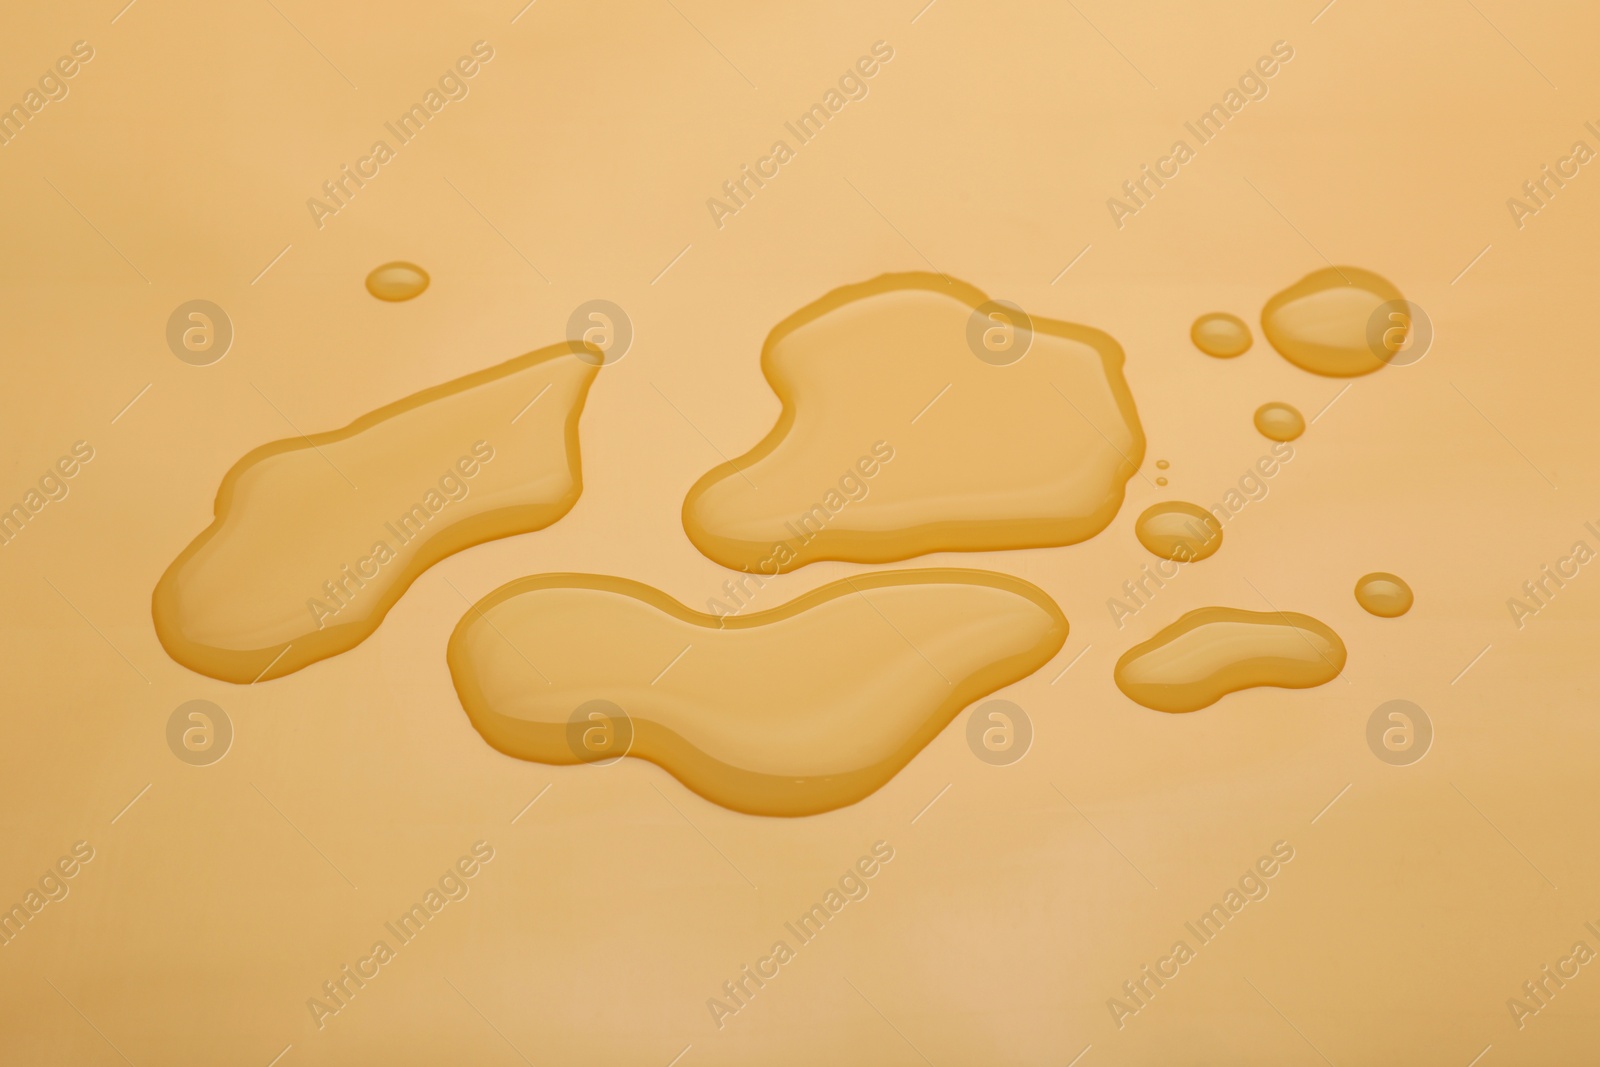 Photo of Puddle of water on pale orange background